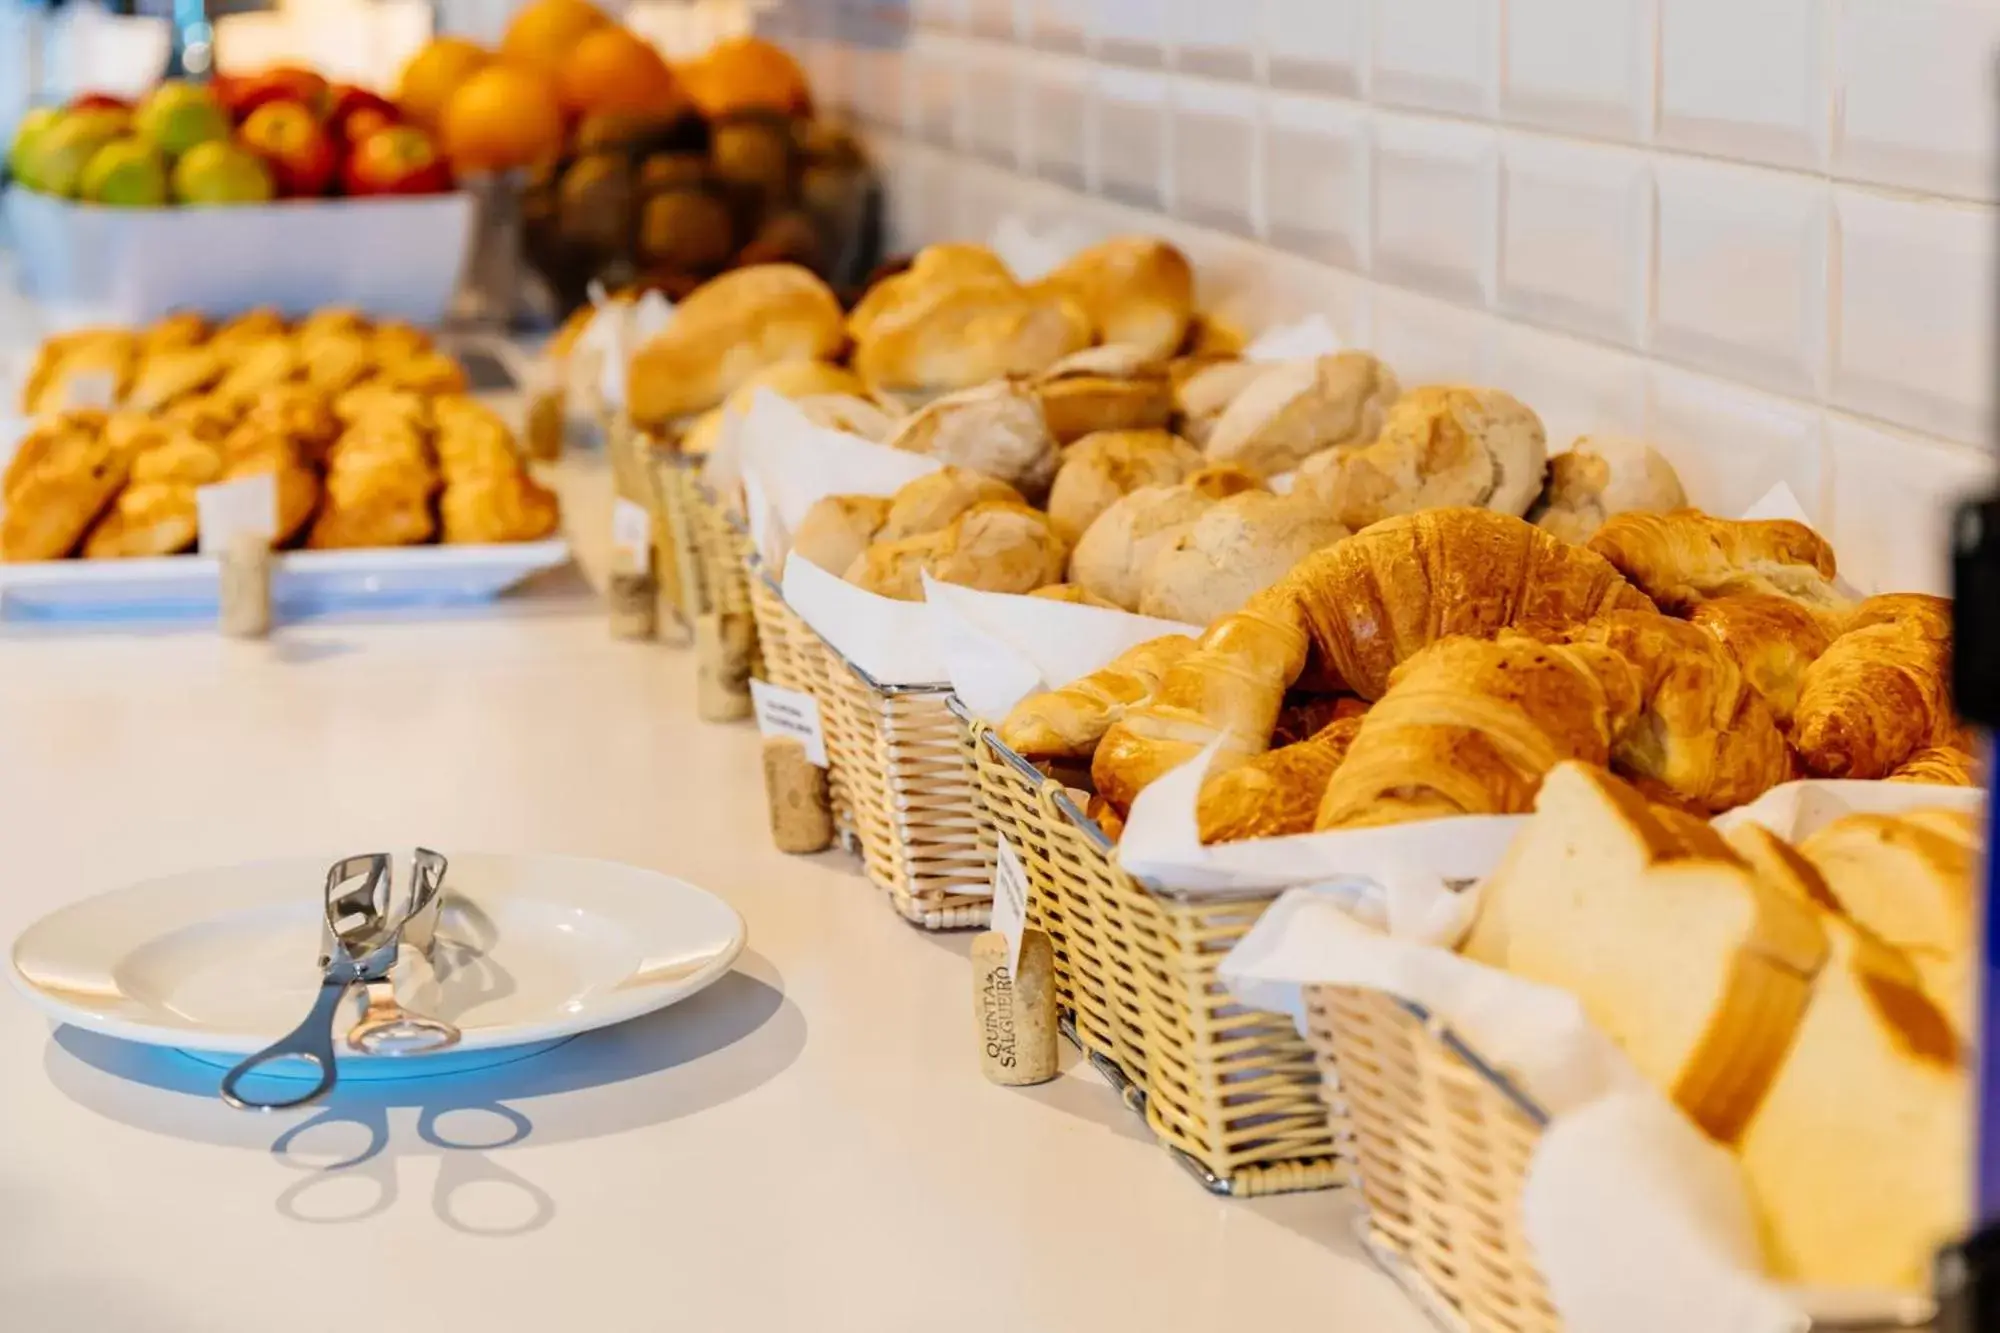 Continental breakfast in Basic Braga by Axis